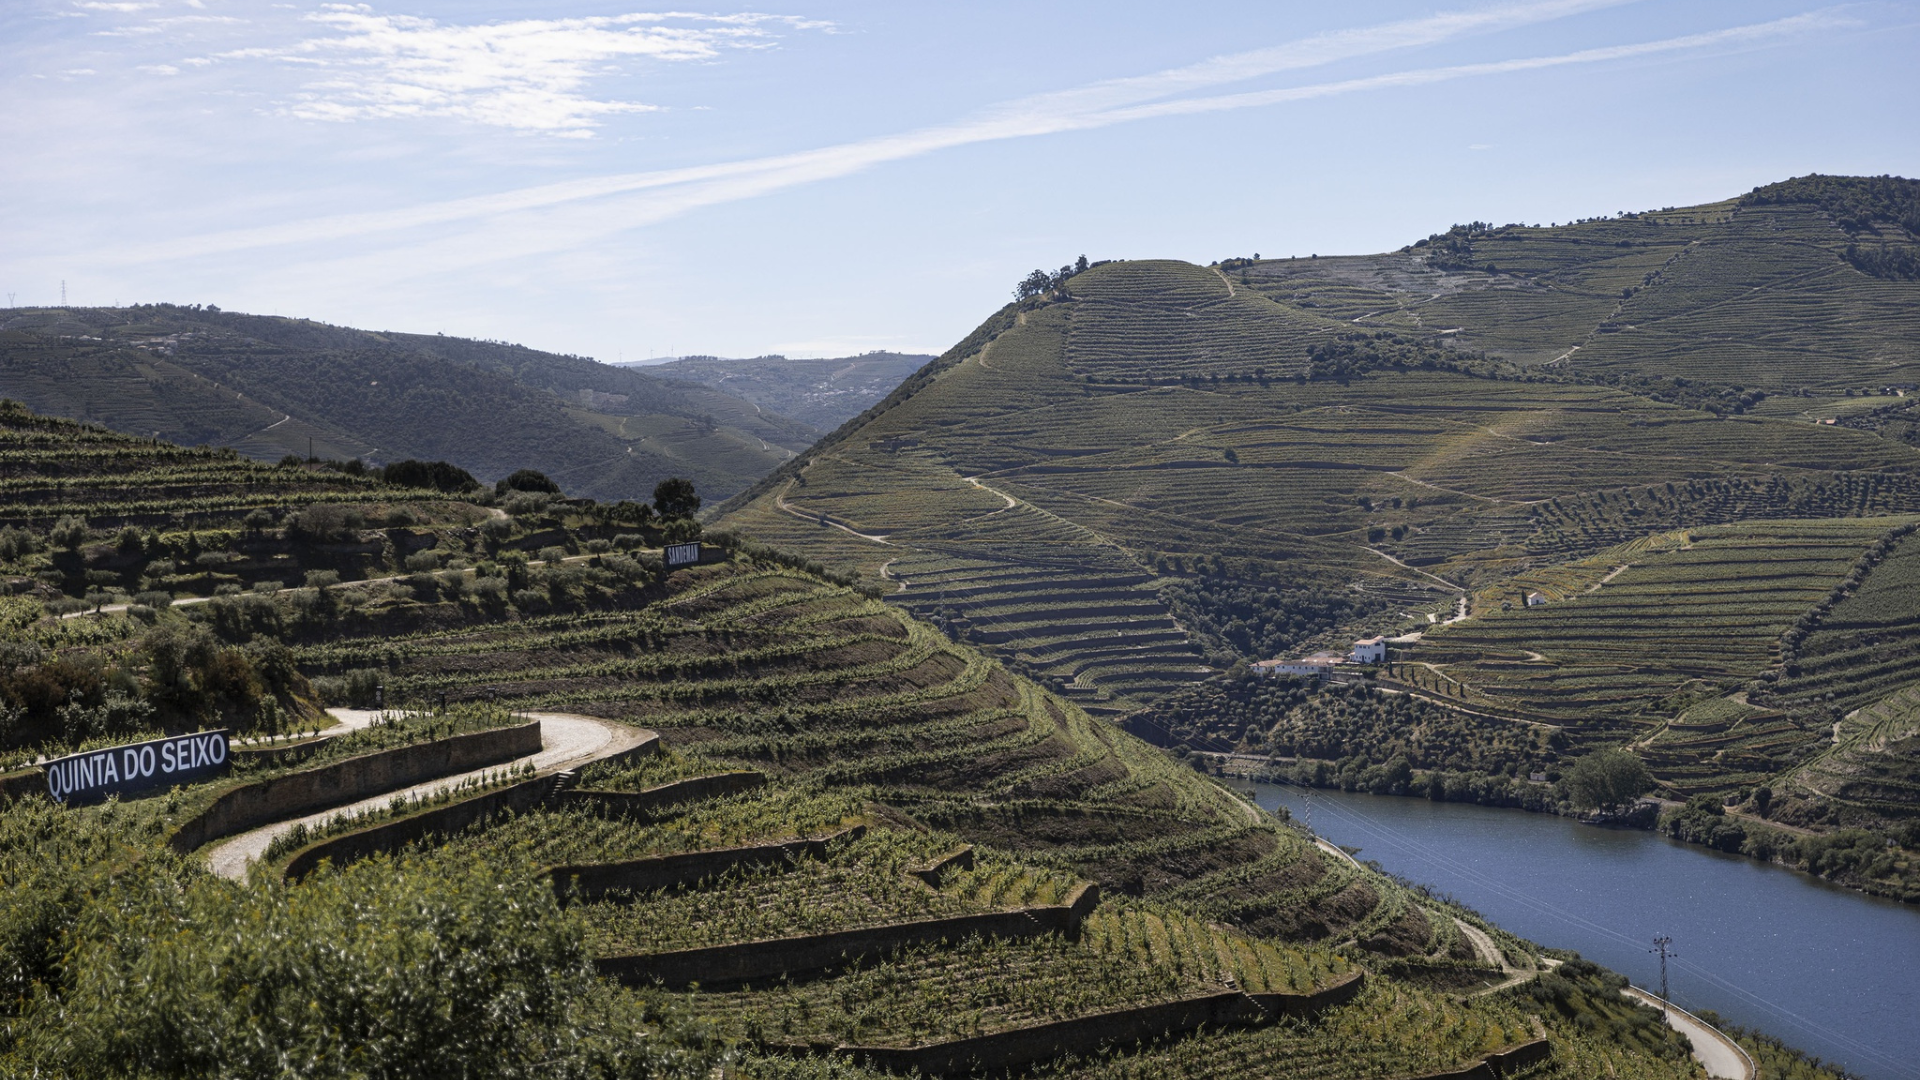 10 Top-Rated Wineries in Douro Portugal, Quinta do Seixo